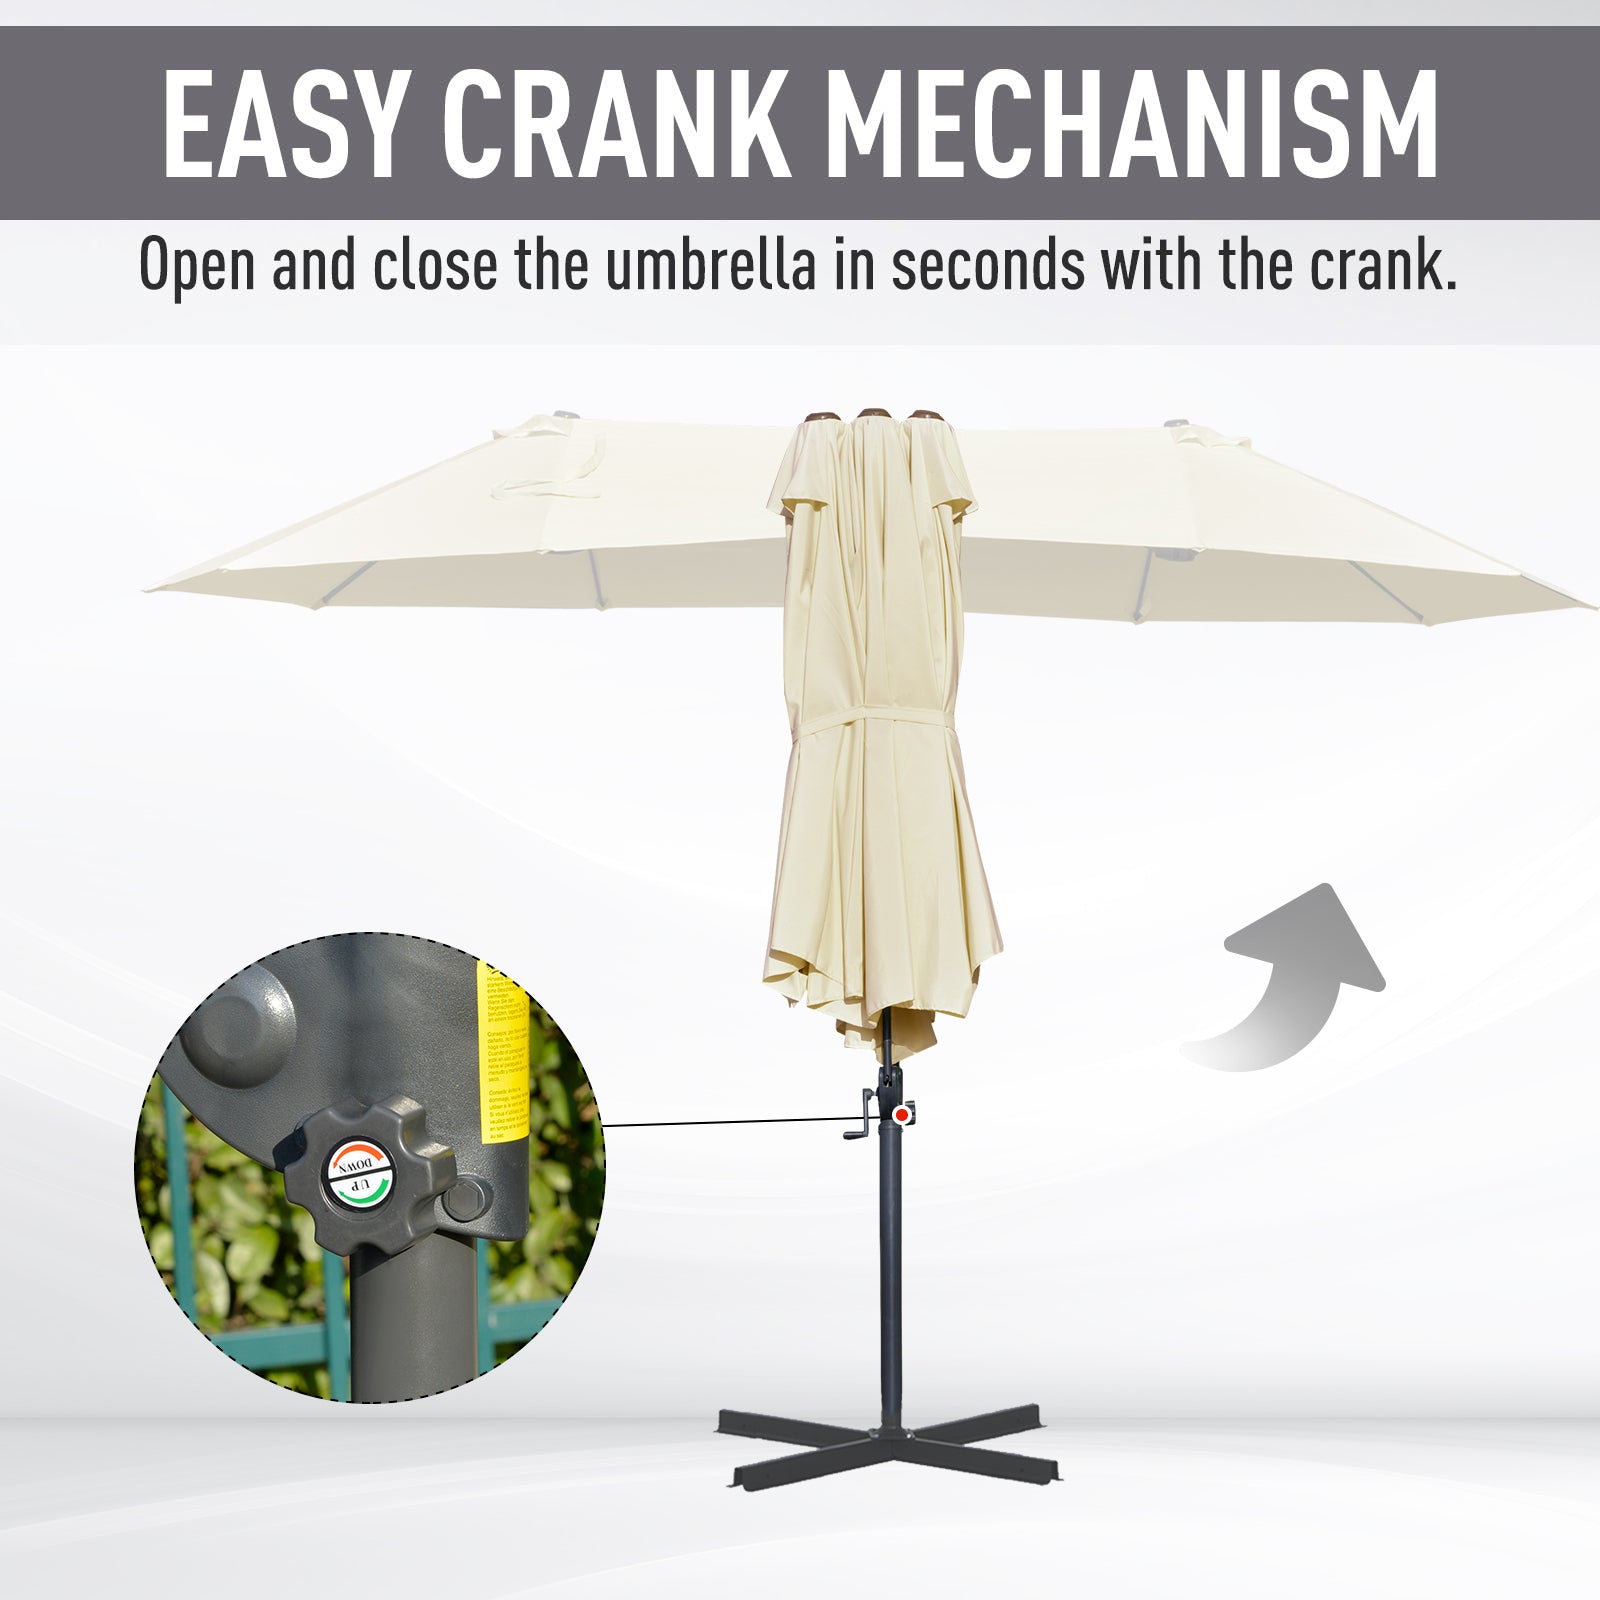 14ft Patio Umbrella Double-Sided Outdoor Market Extra Large Umbrella with Crank, Cross Base for Deck, Lawn, Backyard and Pool, Off-White